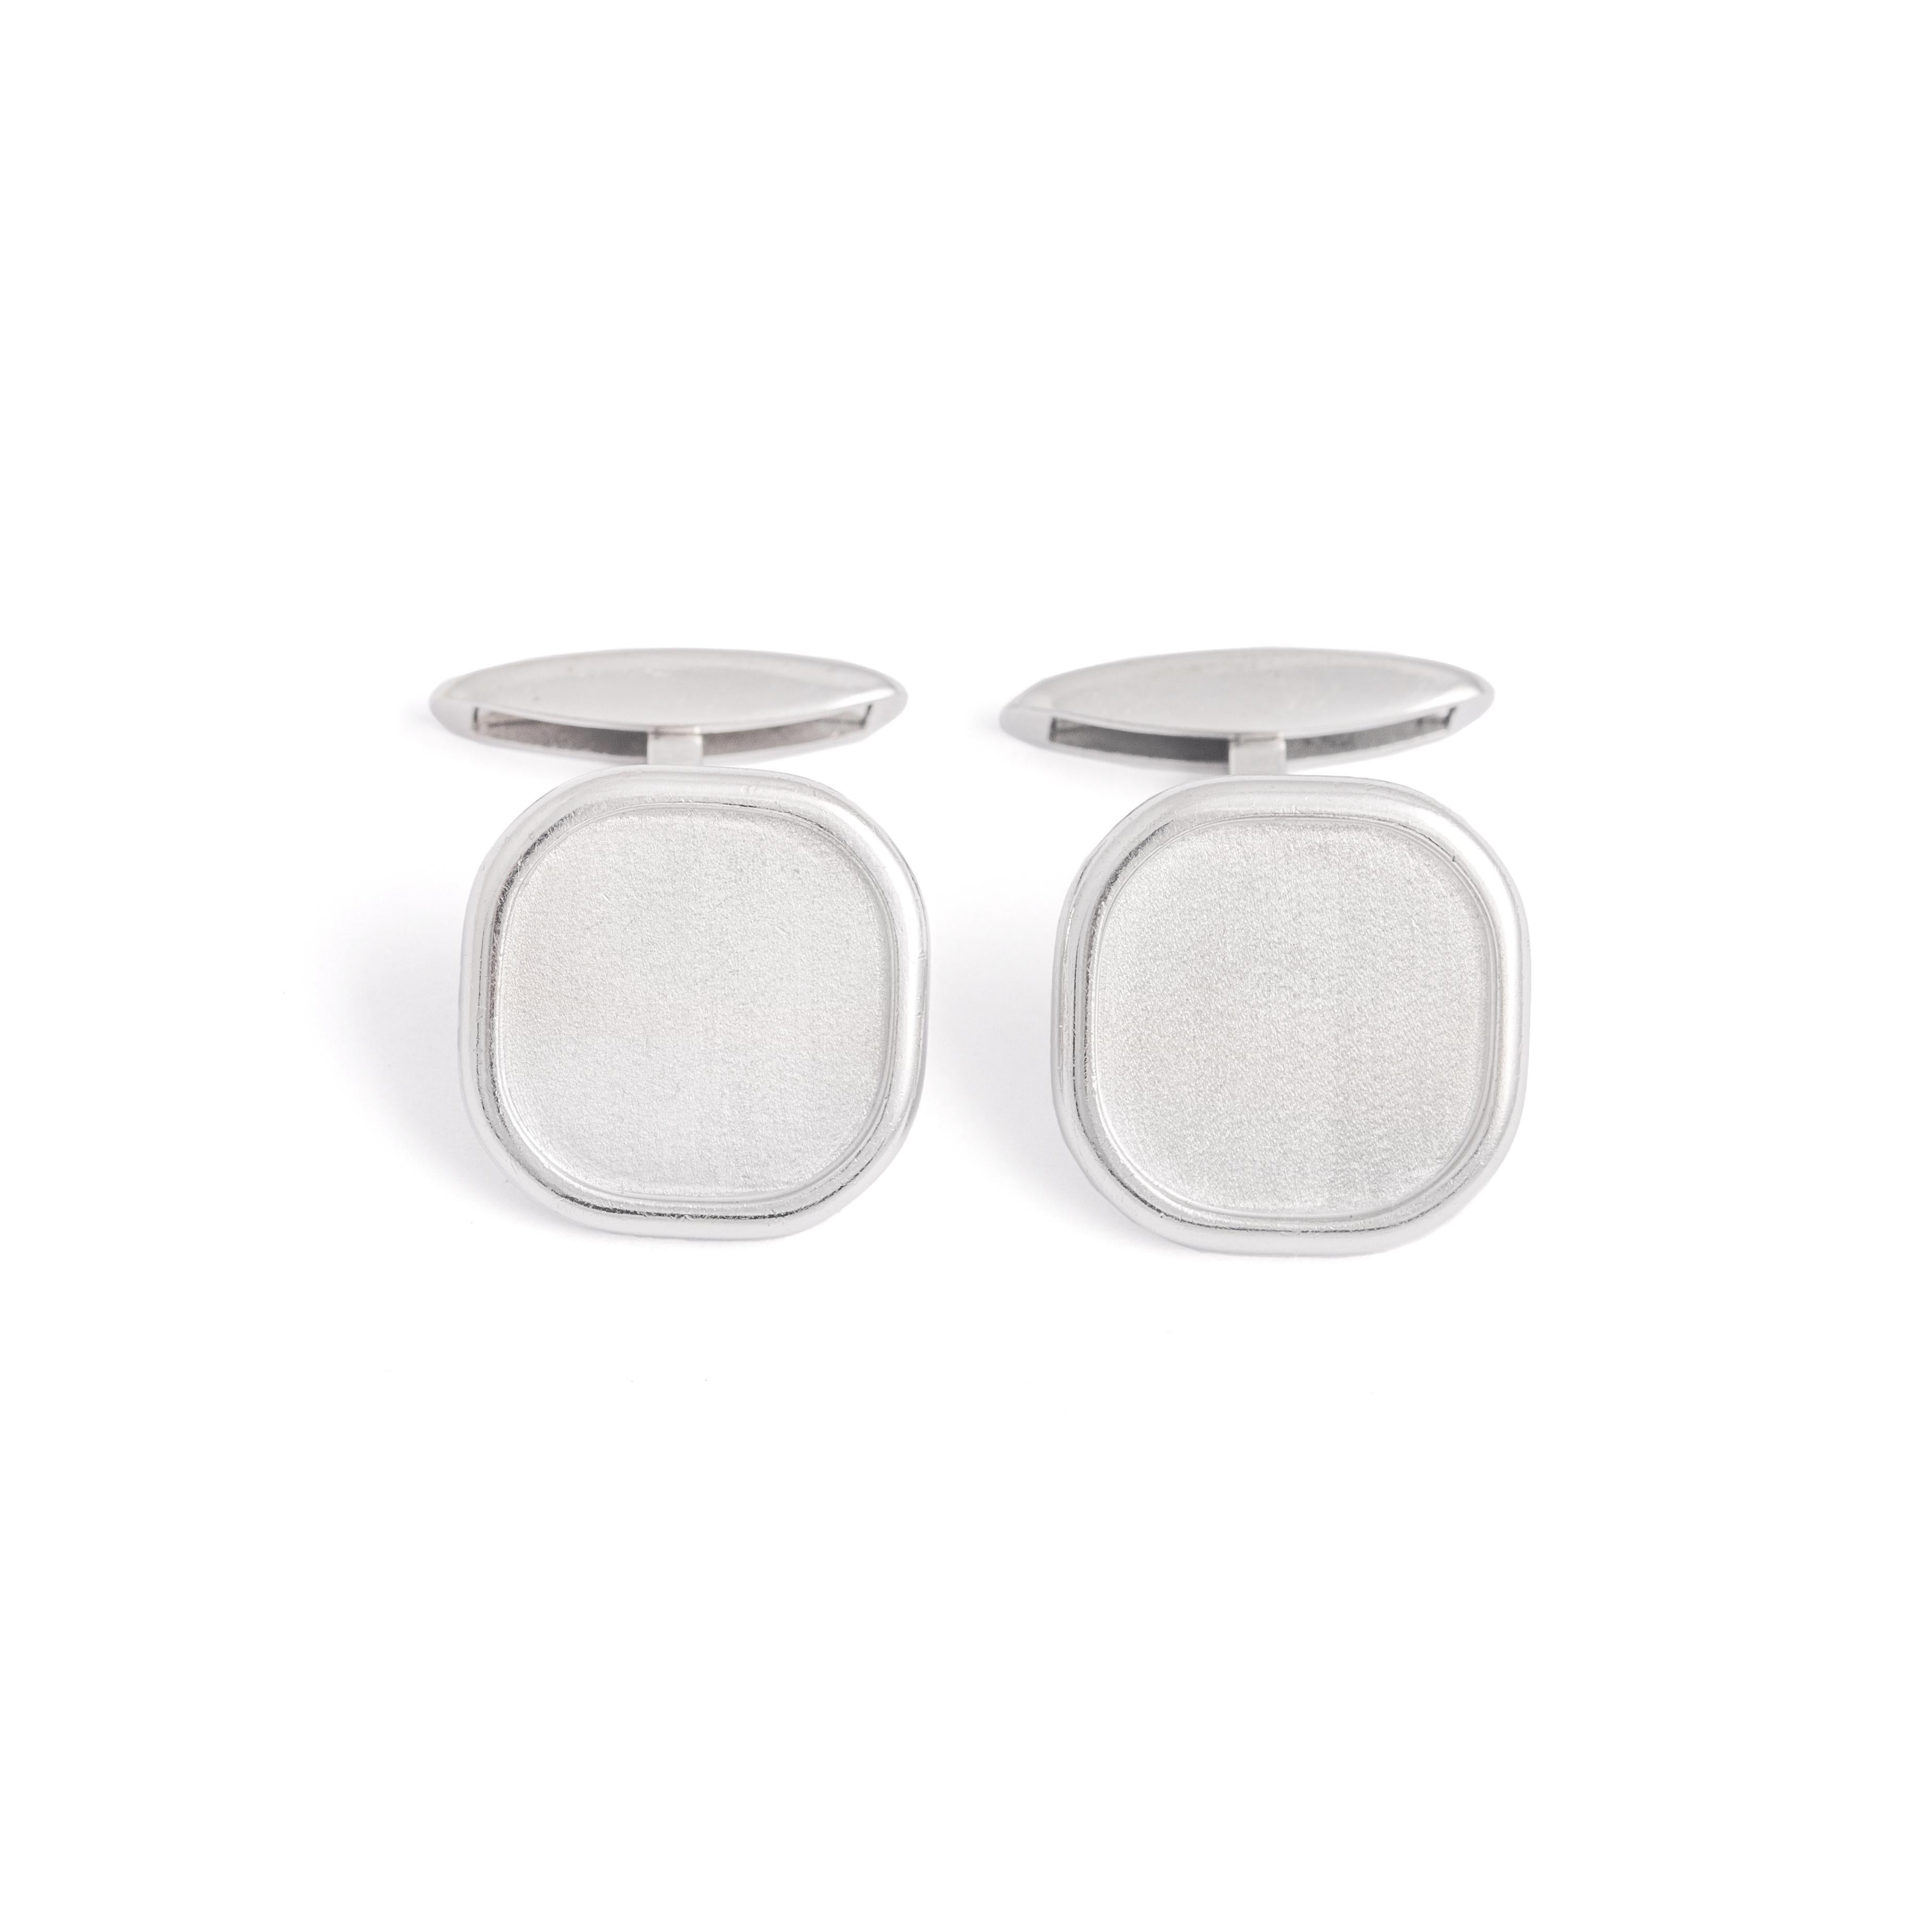 Vintage White Gold 18K Cufflinks.
Signed LUC.

Dimensions: 1.70 x 1.70 centimeters.
Total length: 2.50 centimeters.
Total gross weight: 21.64 grams.